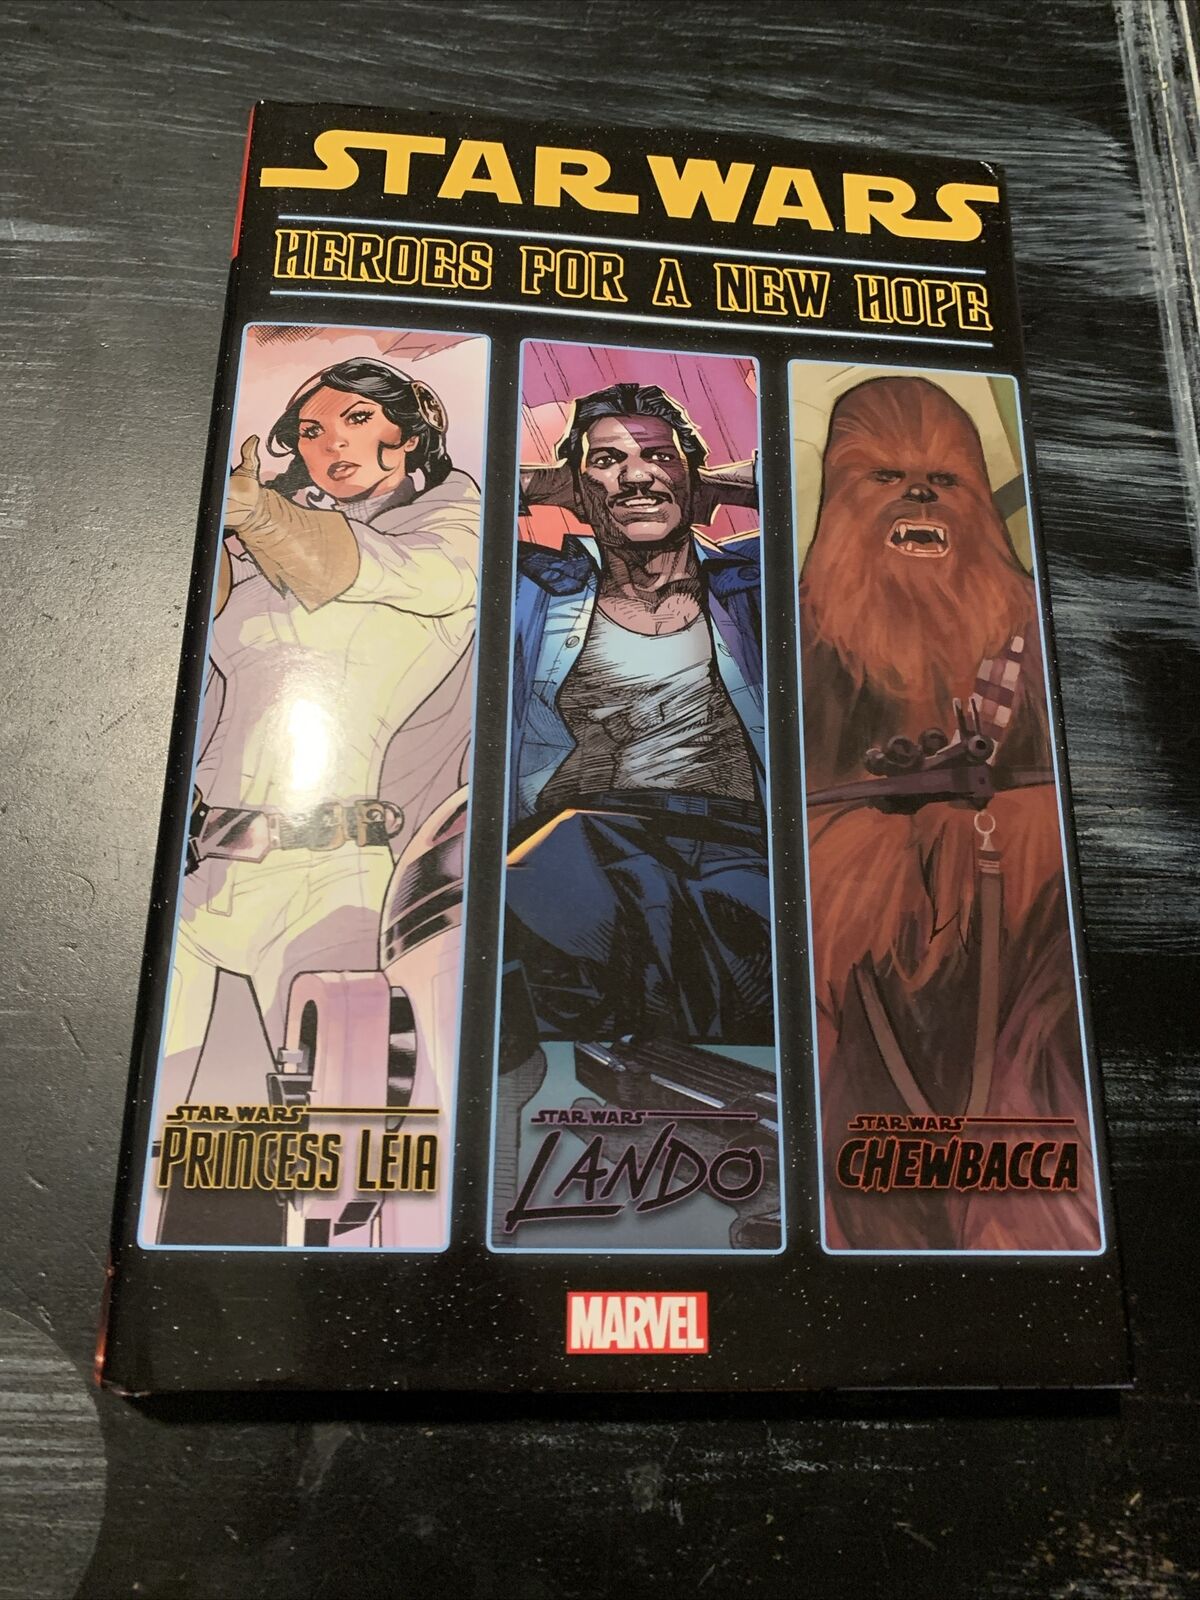 Star Wars: Heroes for a New Hope (Marvel Comics 2016) SIGNED by Charles Soule